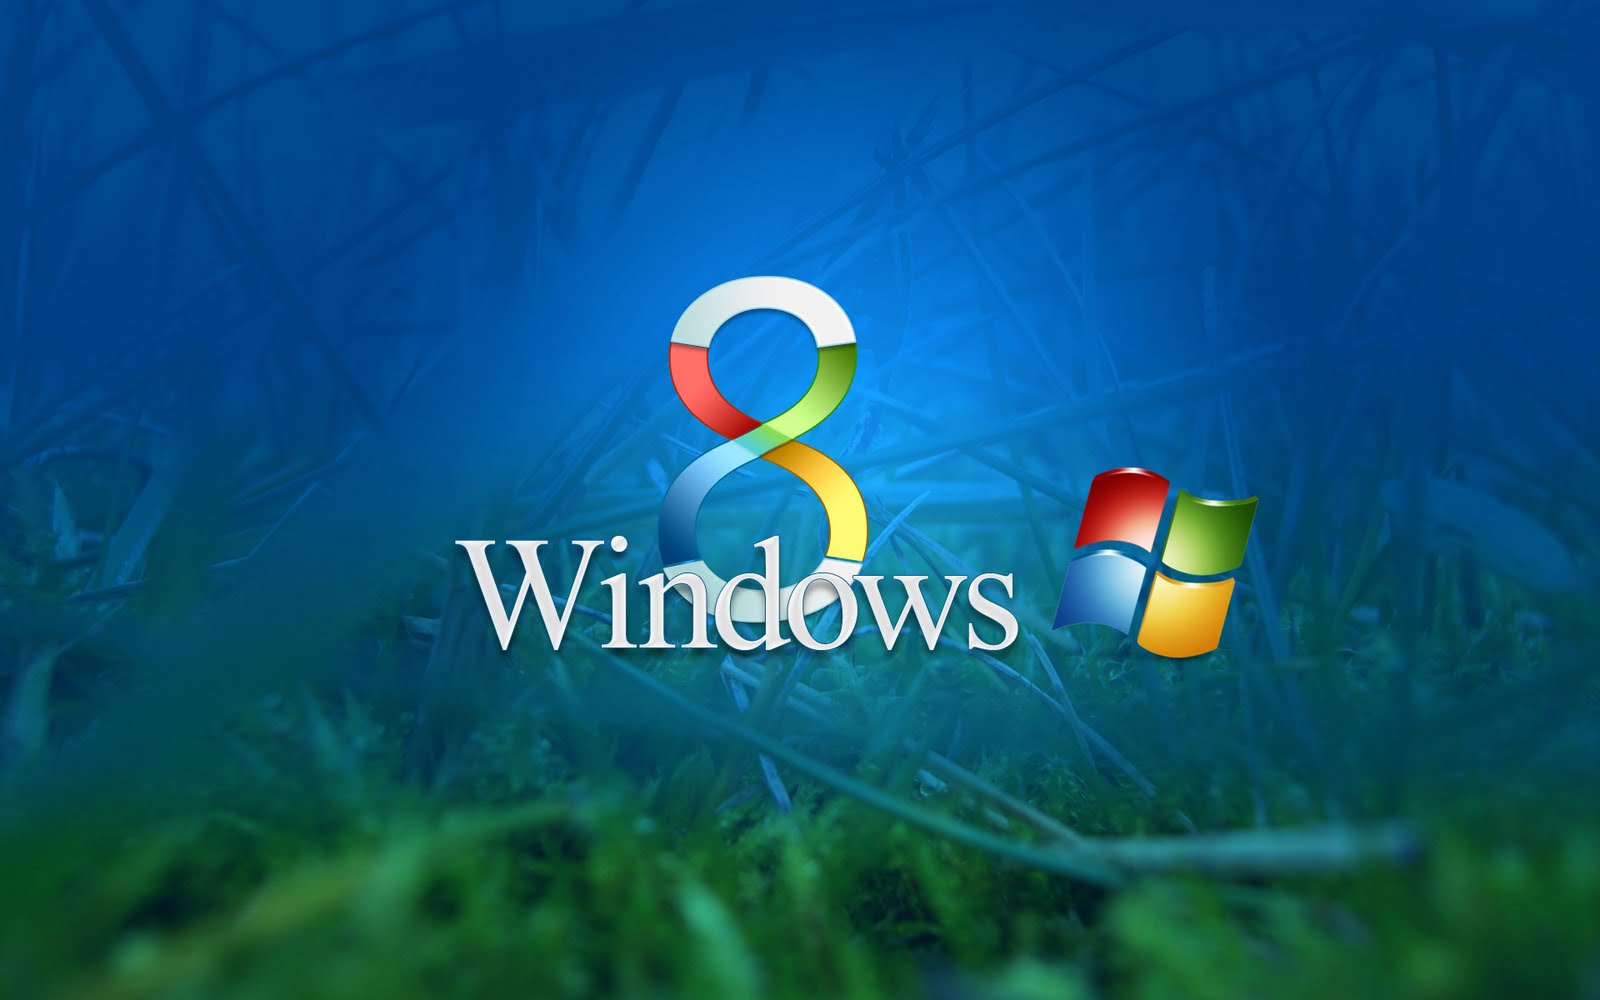 Windows 8 Will Have ‘Robust USB 3.0 Support’